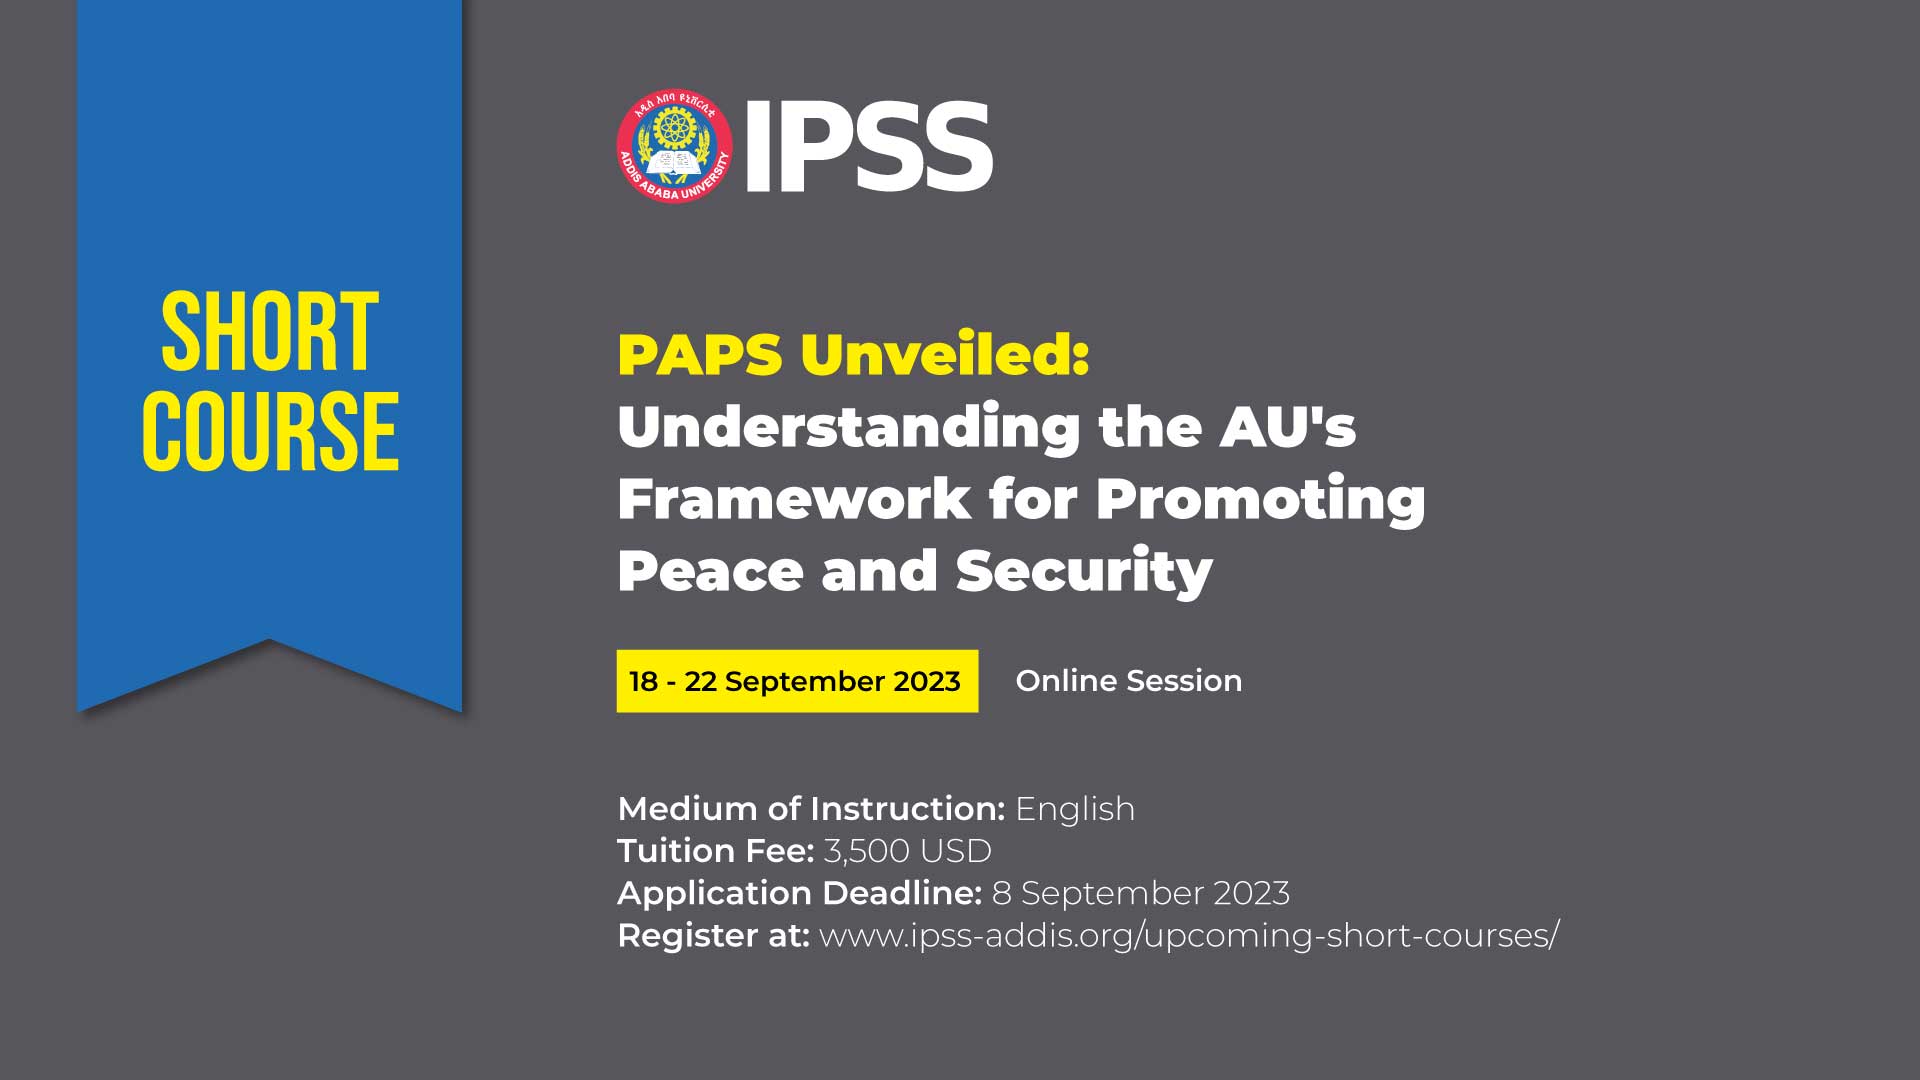 Short Course | PAPS Unveiled: Understanding the AU’s Framework for Promoting Peace and Security